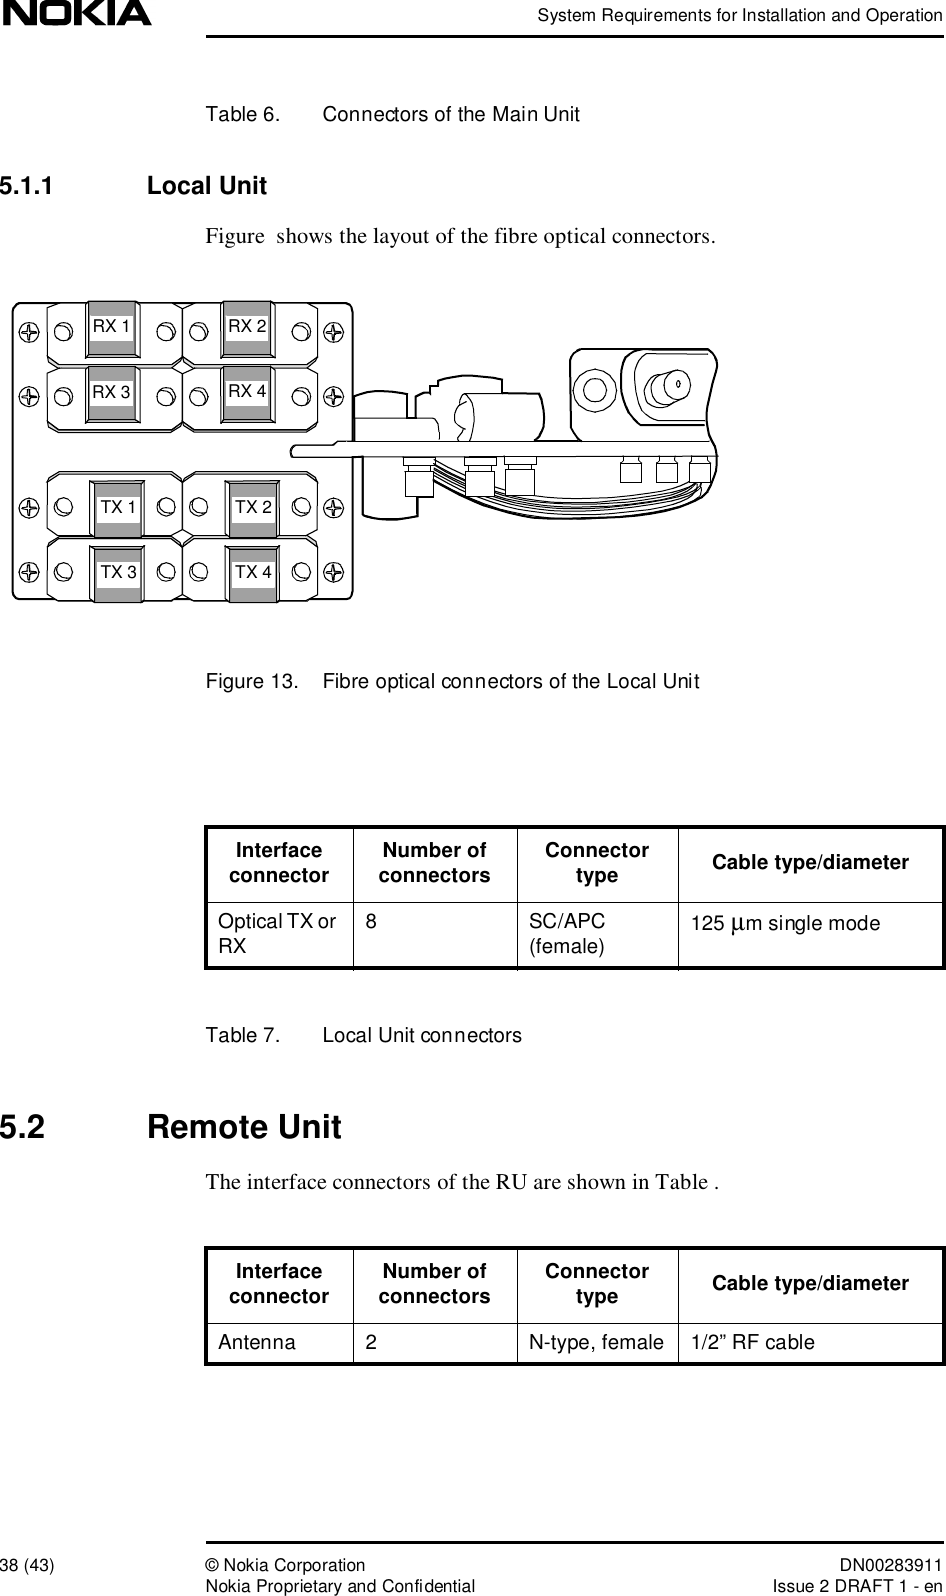 System Requirements for Installation and Operation38 (43)© Nokia Corporation DN00283911Nokia Proprietary and ConfidentialIssue 2 DRAFT 1 - enTable 6.  Connectors of the Main Unit5.1.1  Local UnitFigure  shows the layout of the fibre optical connectors.Figure 13.  Fibre optical connectors of the Local UnitTable 7.  Local Unit connectors5.2  Remote UnitThe interface connectors of the RU are shown in Table . RX 1RX 2RX 4RX 3TX 1TX 2TX 3TX 4Interface connector Number of connectors Connector type Cable type/diameterOptical TX or RX8SC/APC (female)125 µm single modeInterface connector Number of connectors Connector type Cable type/diameterAntenna 2N-type, female 1/2” RF cable